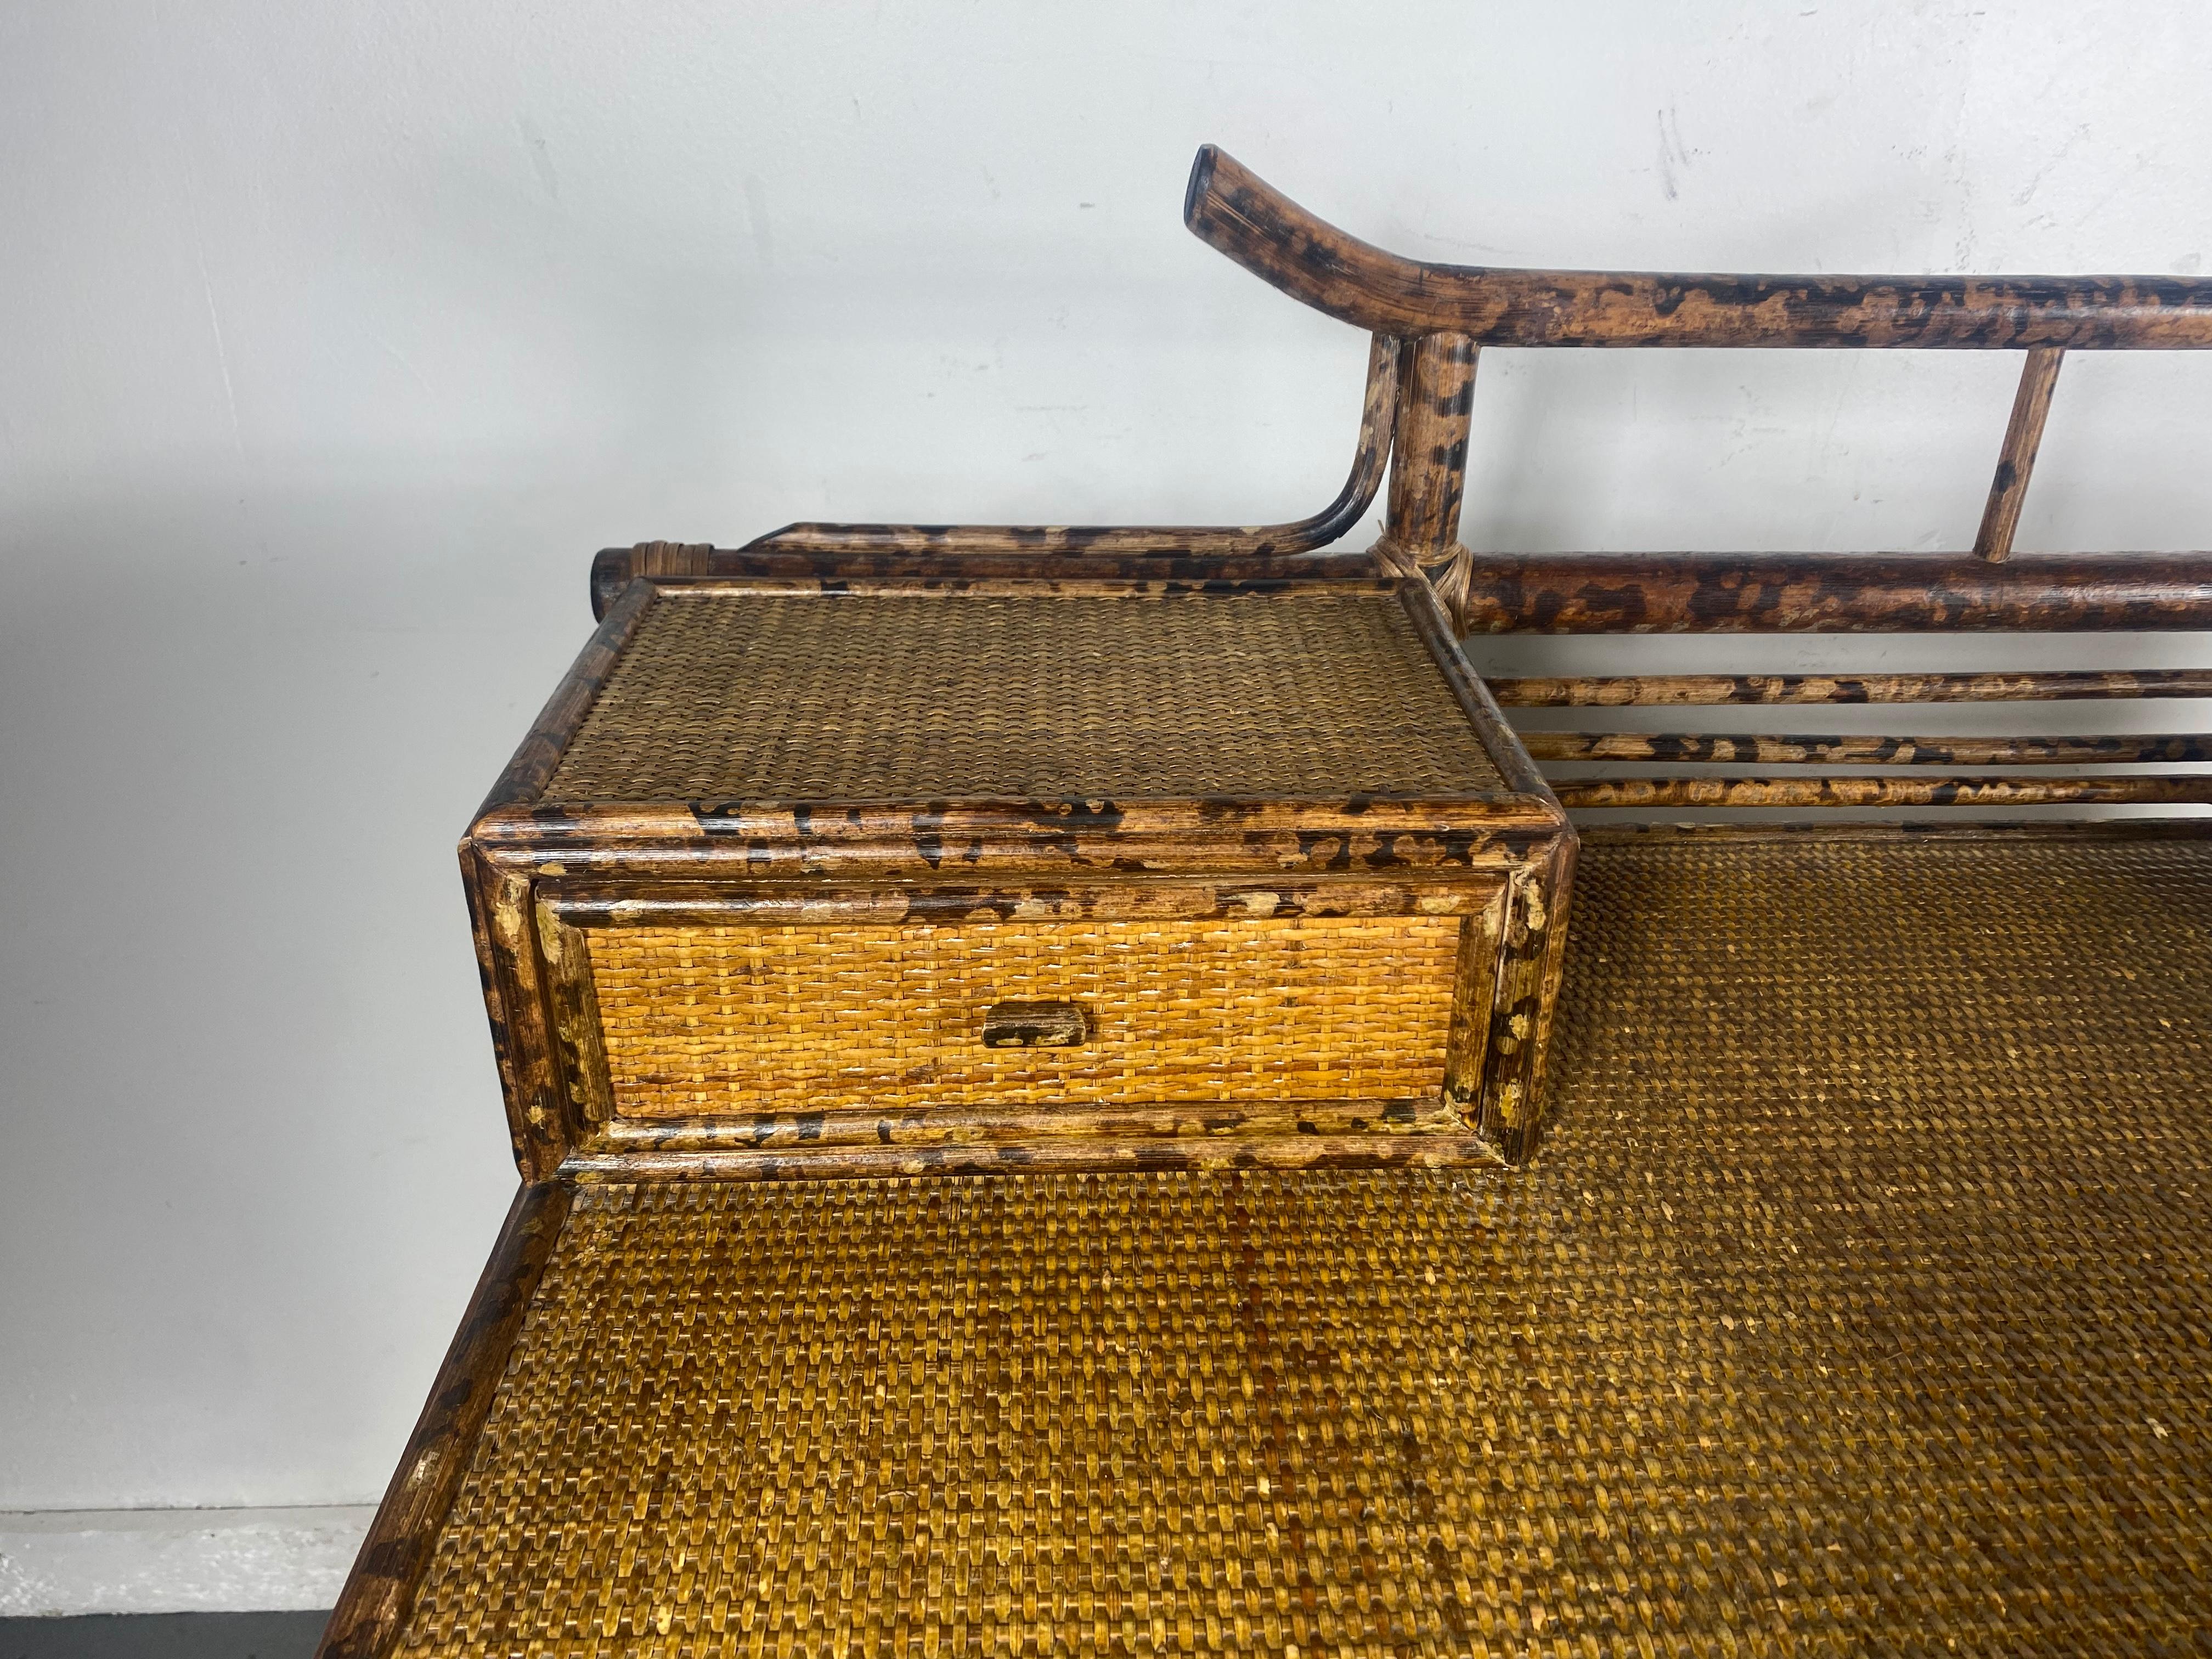 Bamboo and rattan writing desk features Asian chinoiserie style,,,4 drawers,,, Made for Bloomingdale's. Very good condition with minor imperfections,,, some wrapping (see photo) back height 40